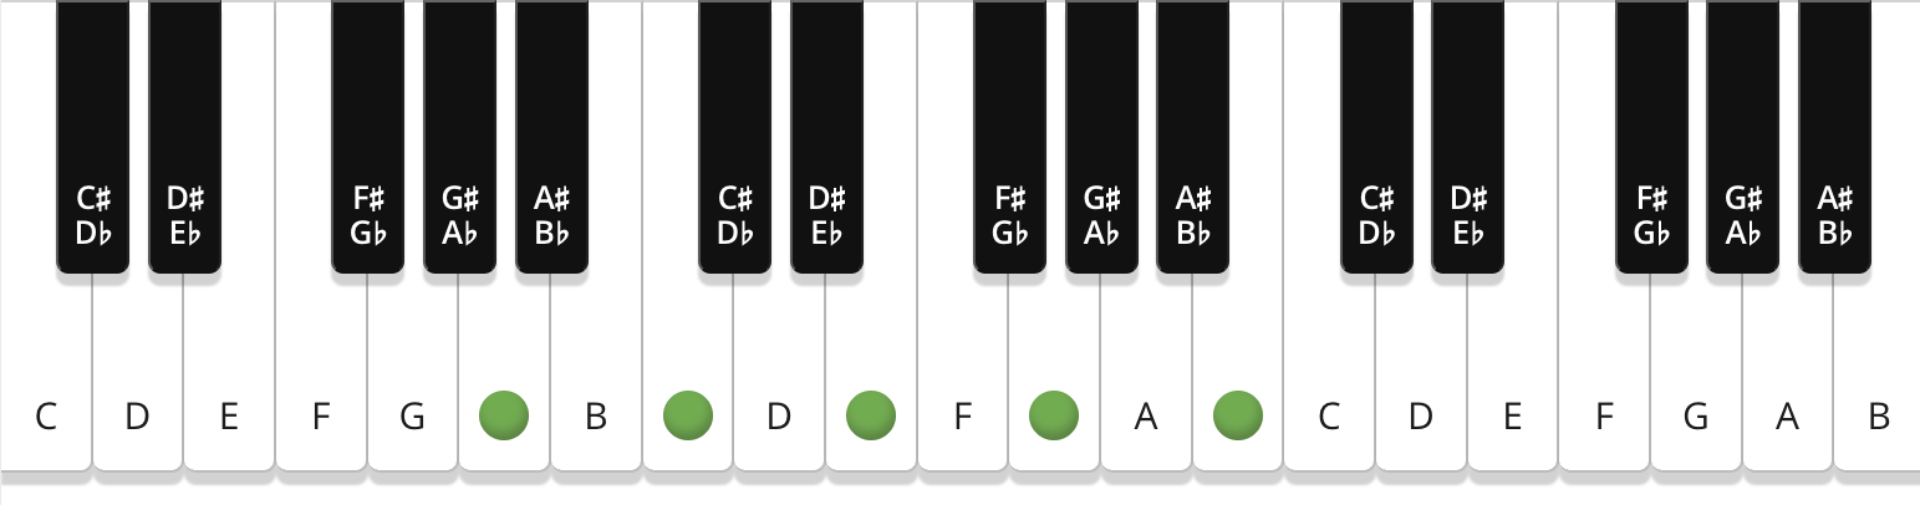 5 tips for using R&B chord progressions in your song | Native ...